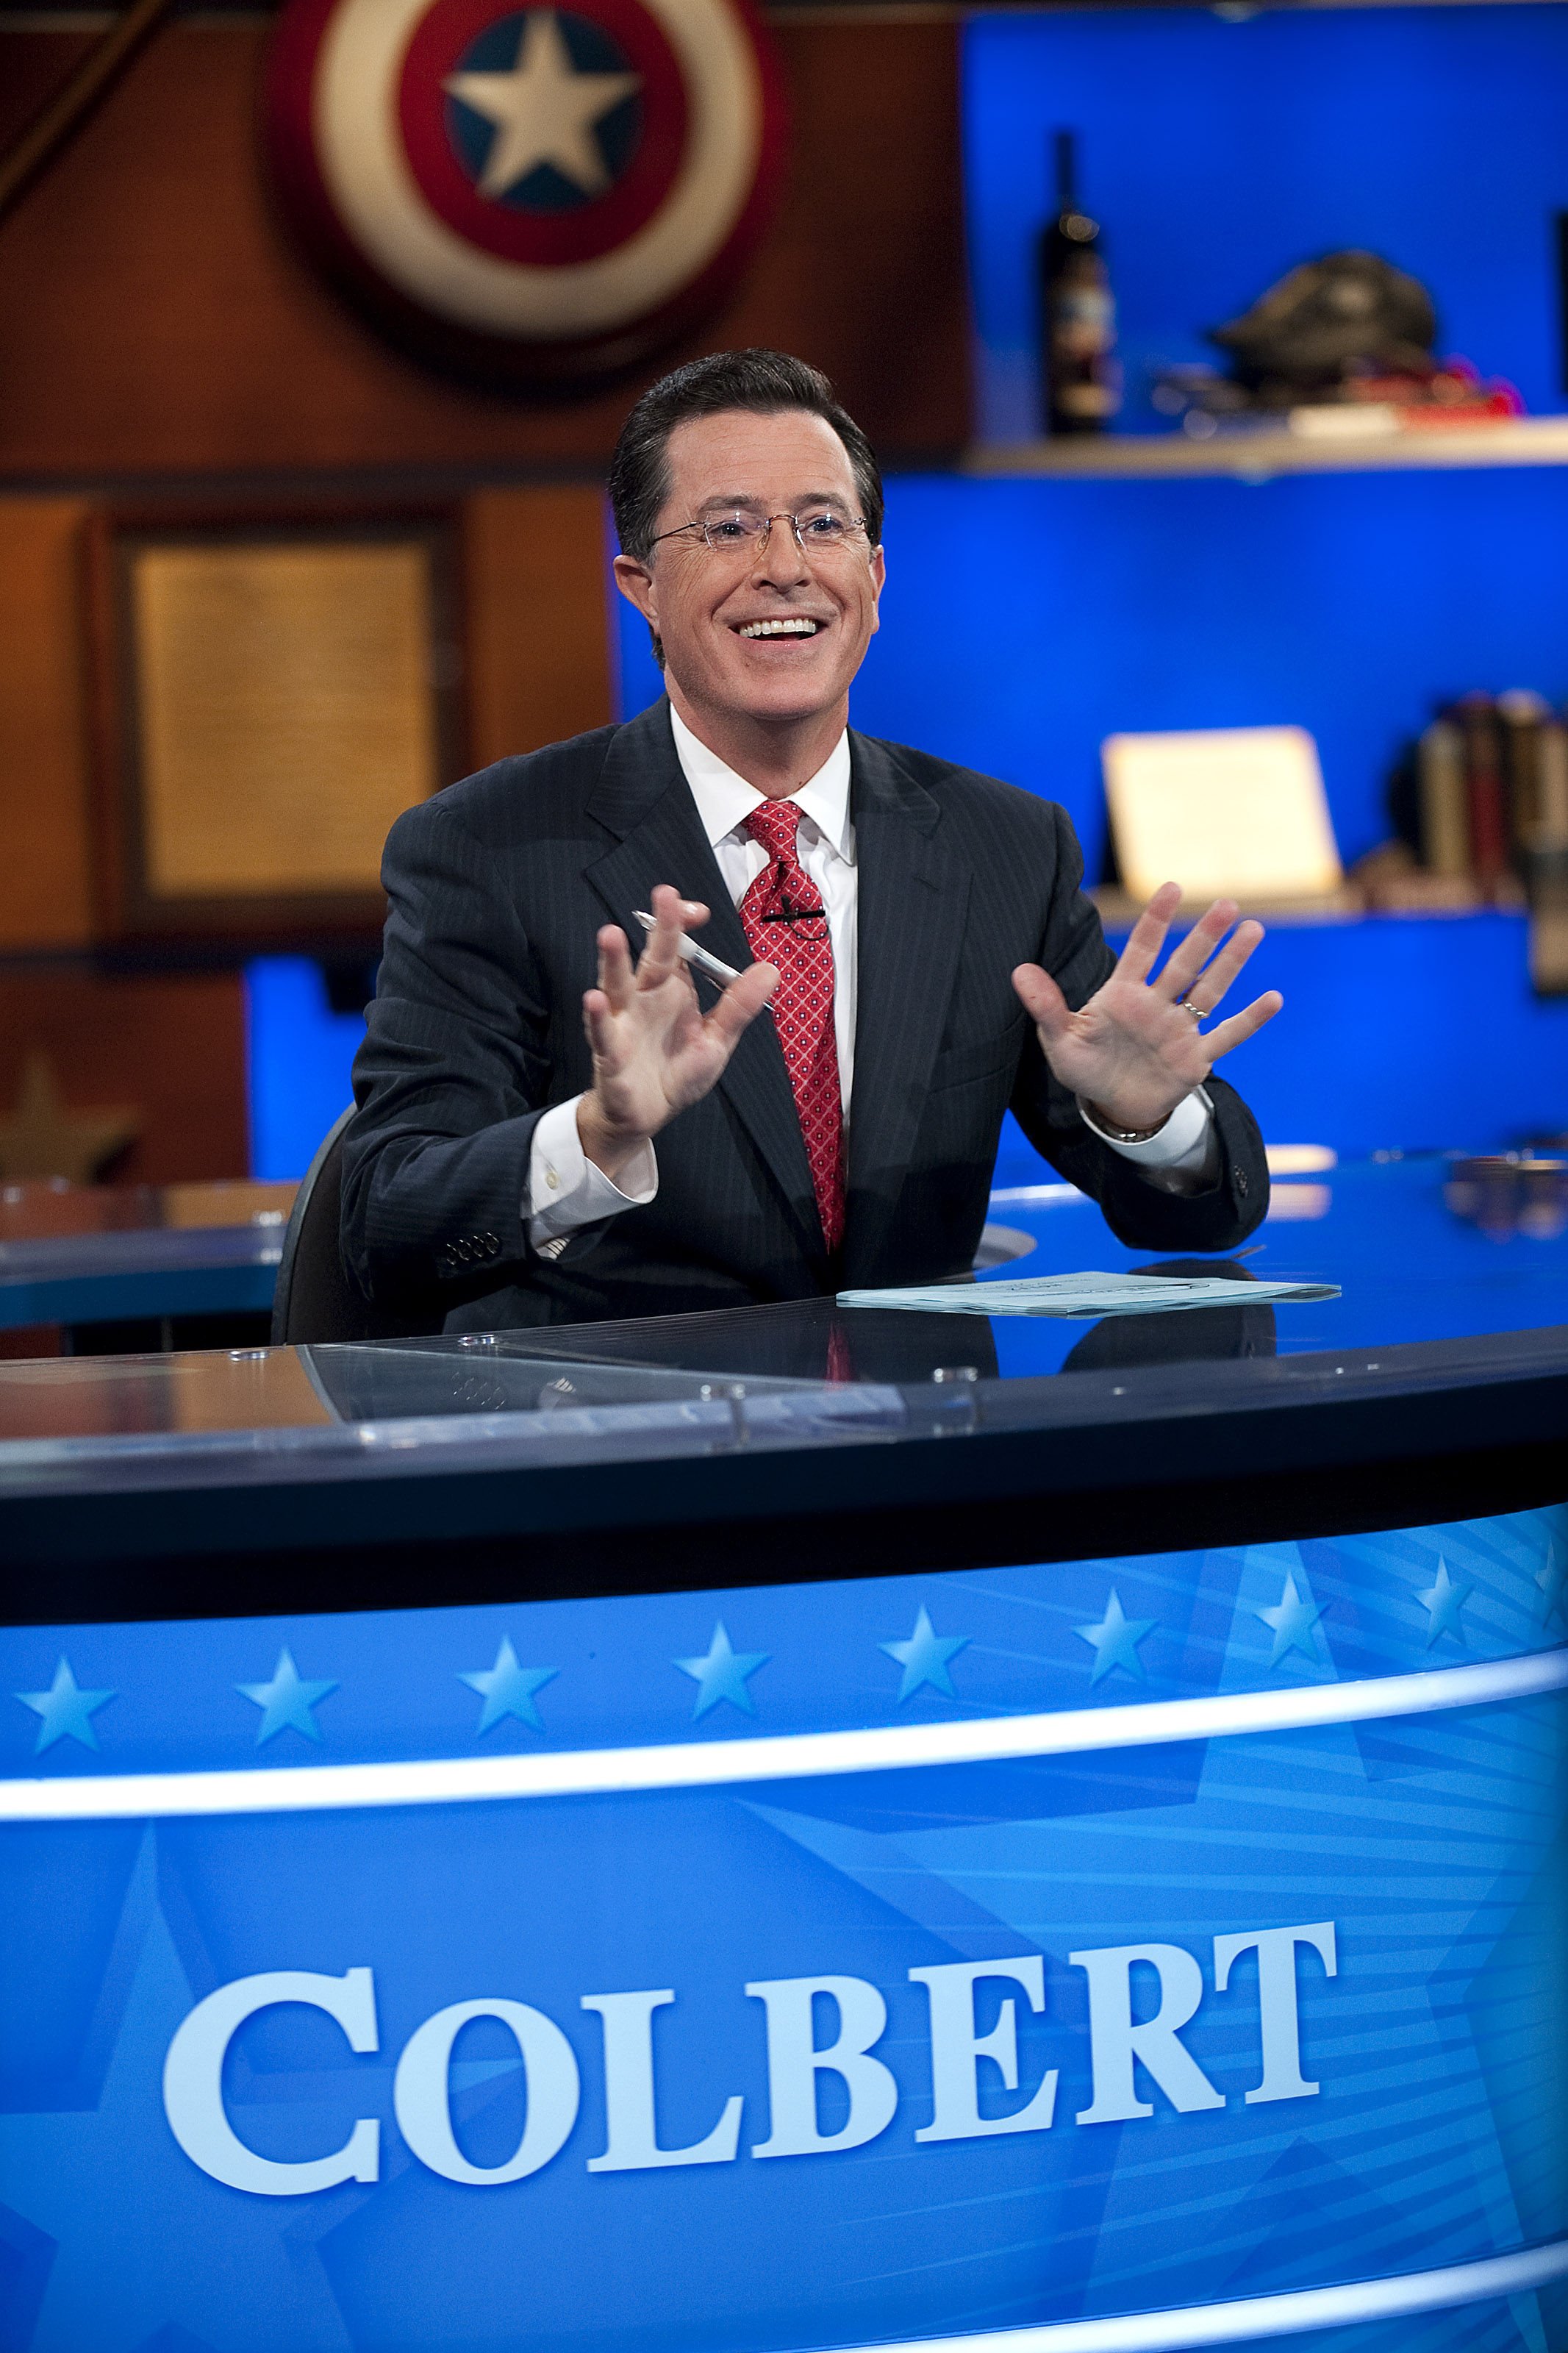 Stephen Colbert during the "Been There: Won That: The Returnification of the American-Do Troopscapeon" special of The Colbert Report on Sept. 8, 2010 in New York City. (Scott Gries—Picturegroup/Comedy Central)